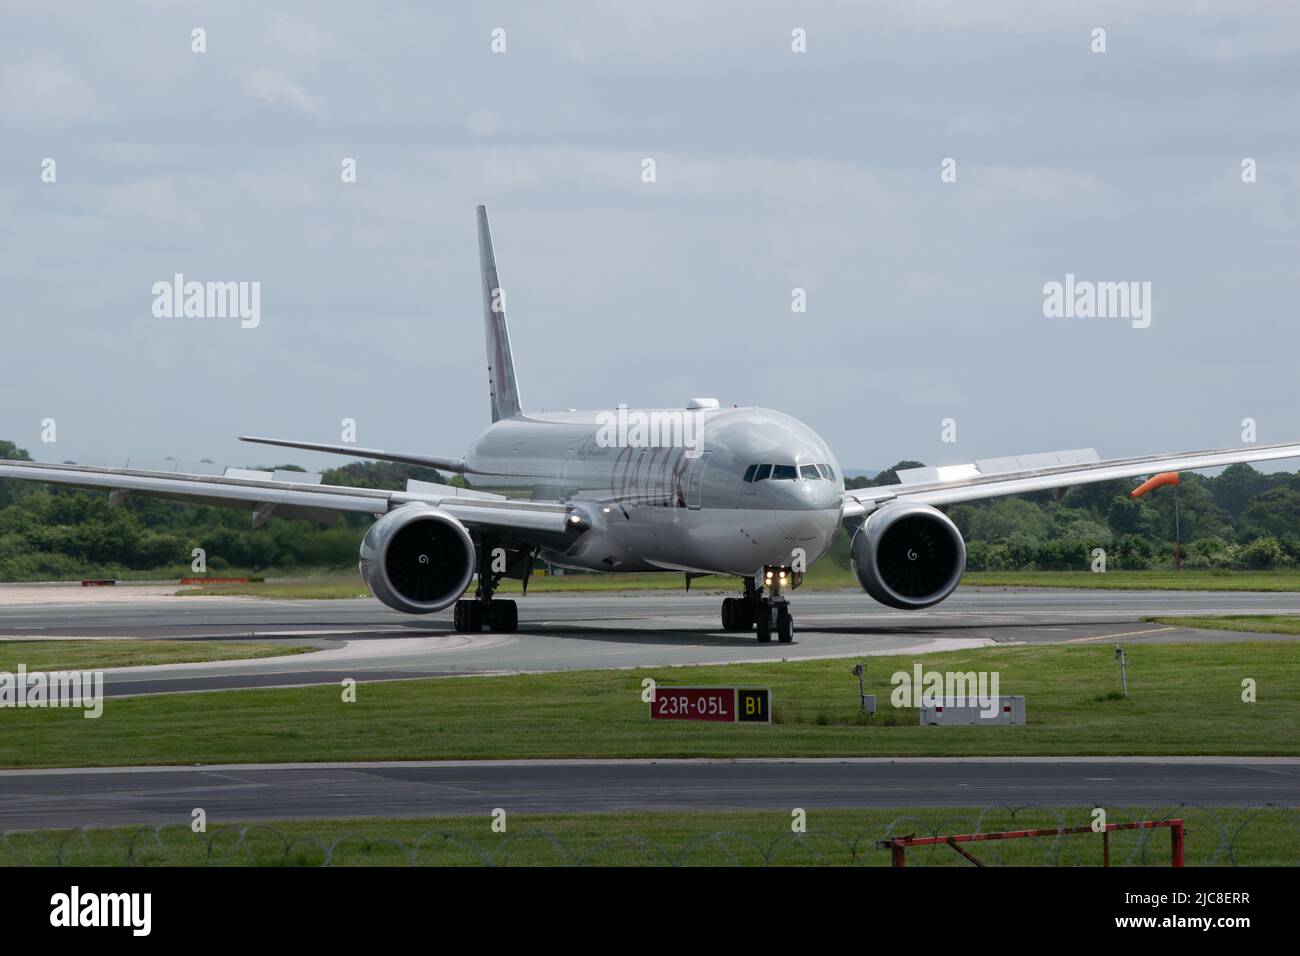 Qatar Airlines Boeing 777- 300 er on runway at Manchester Airport UK Stock Photo